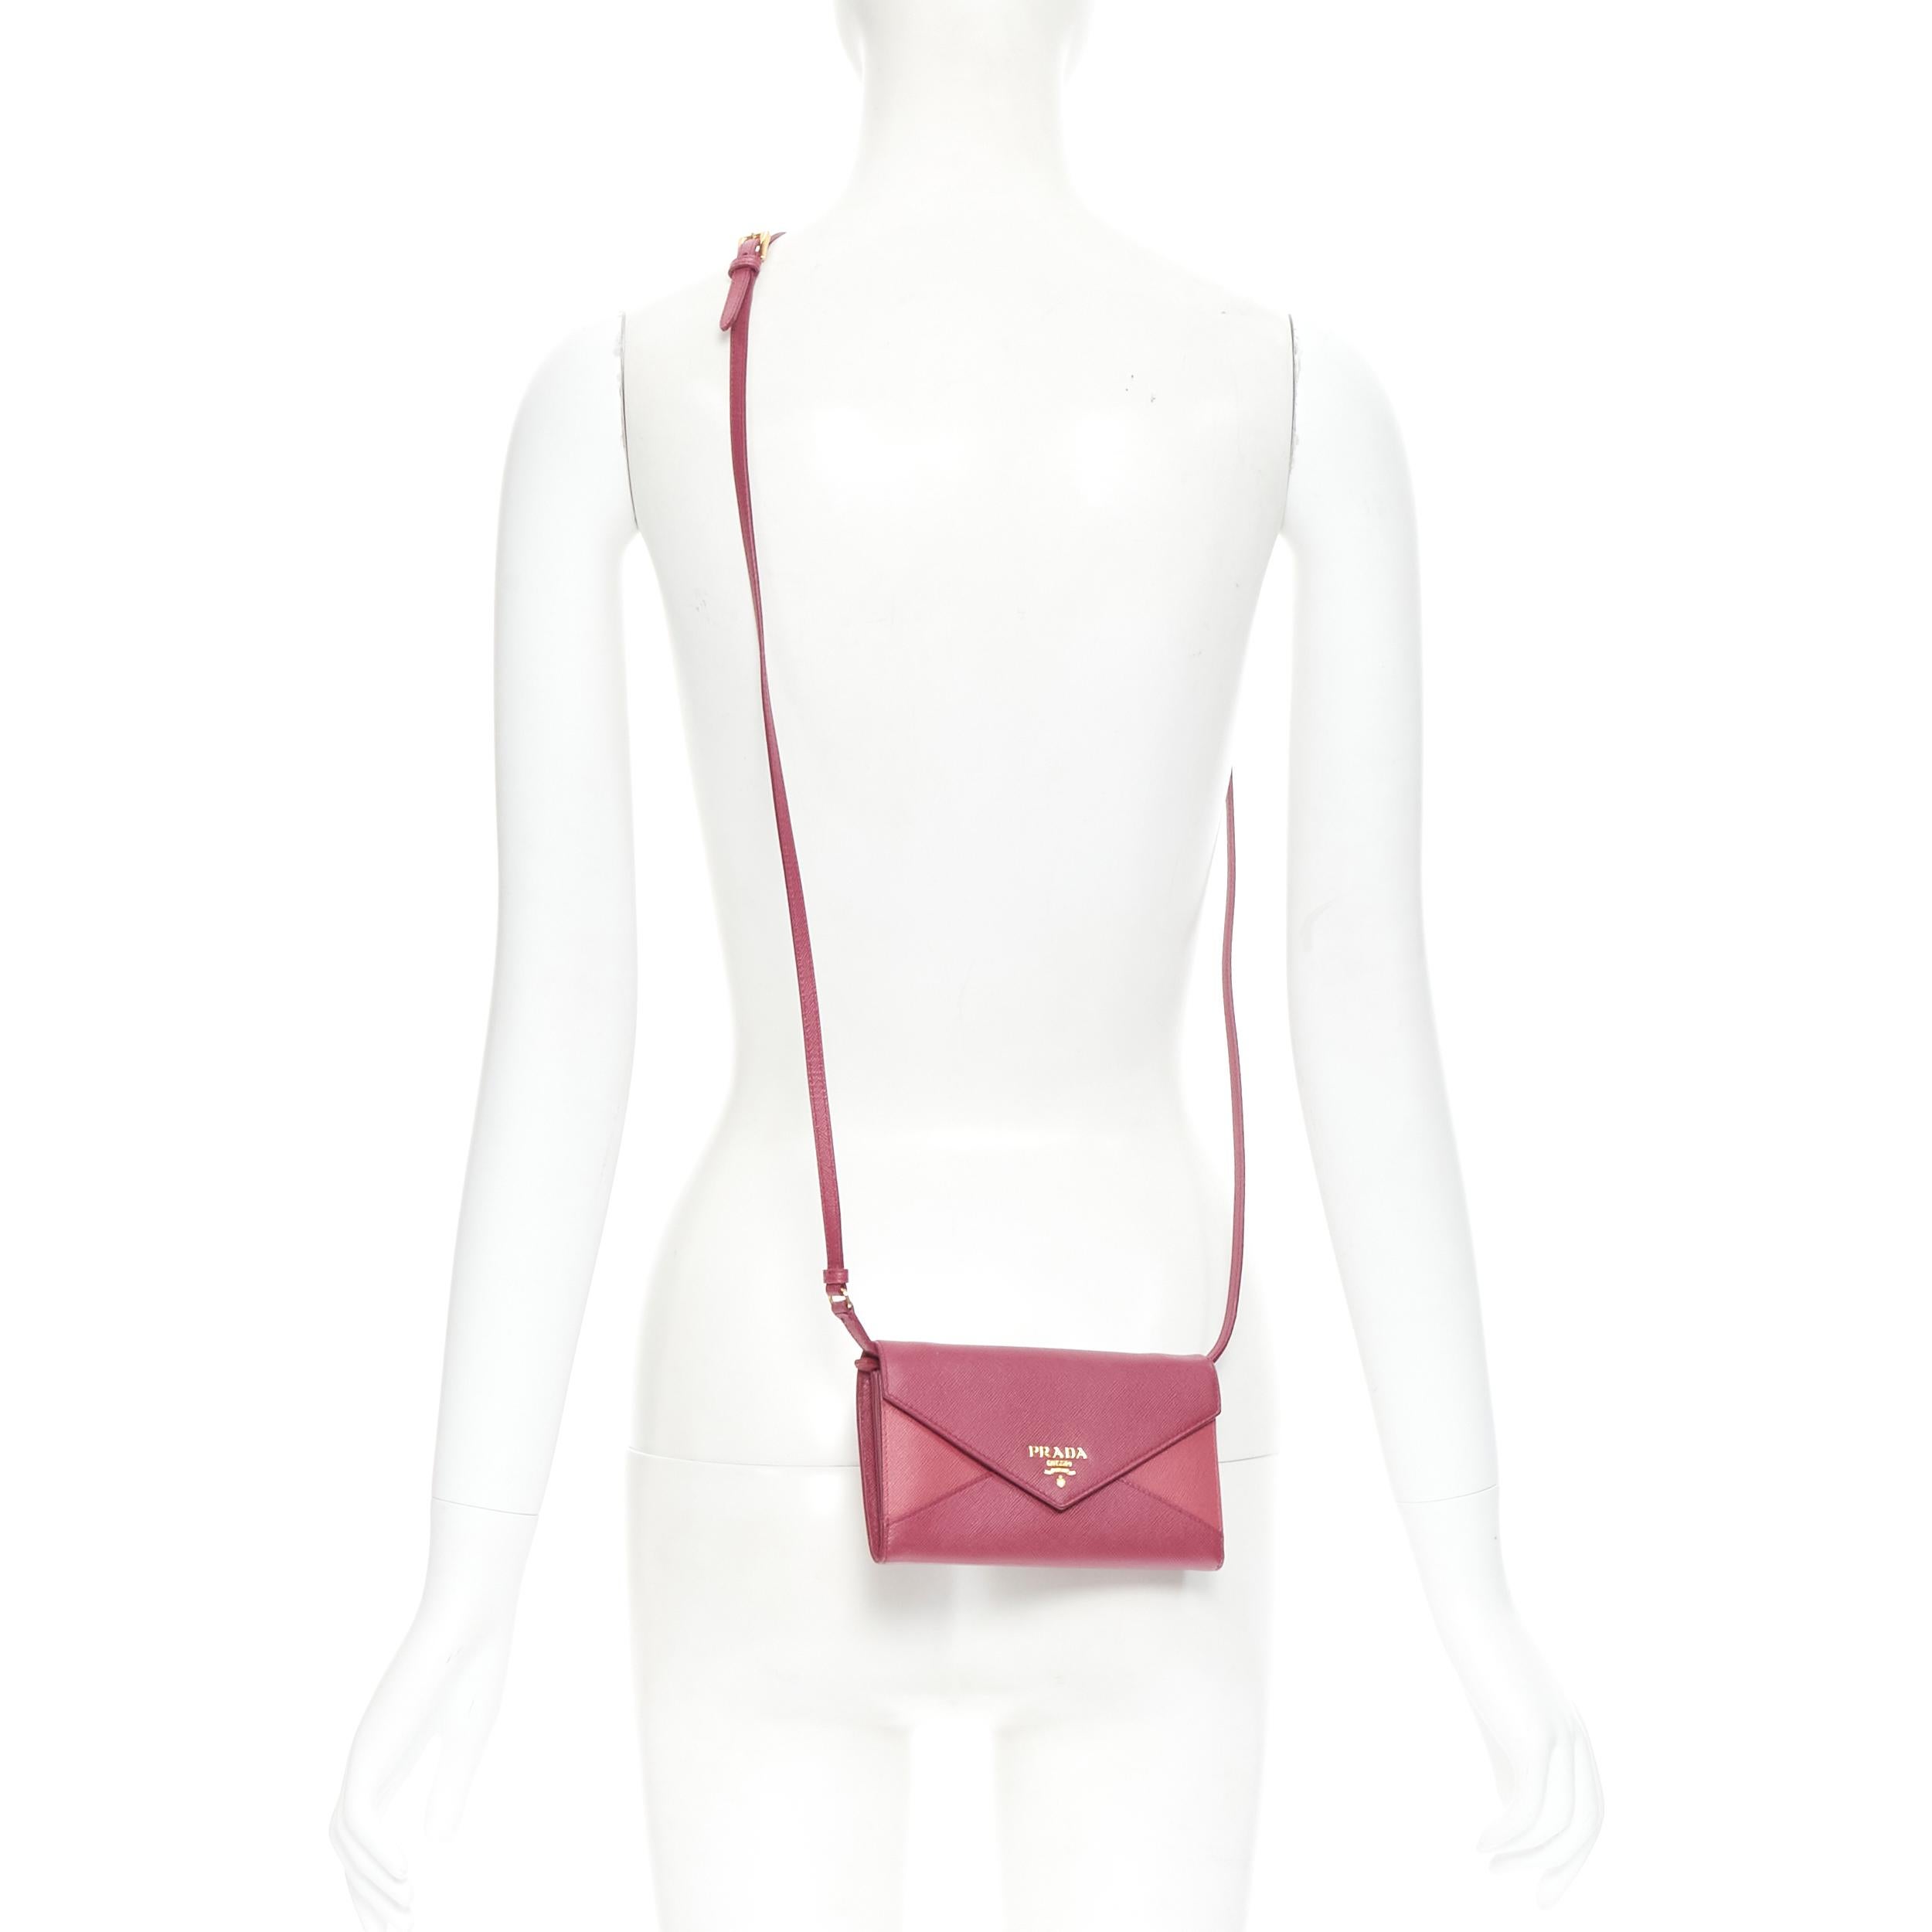 new PRADA pink diamond envelop gold logo wallet on chain crossbody clutch bag 
Reference: TGAS/B01442 
Brand: Prada 
Designer: Miuccia Prada 
Model: Envelop wallet on chain 
Material: Leather 
Color: Pink 
Pattern: Solid 
Closure: Button 
Extra